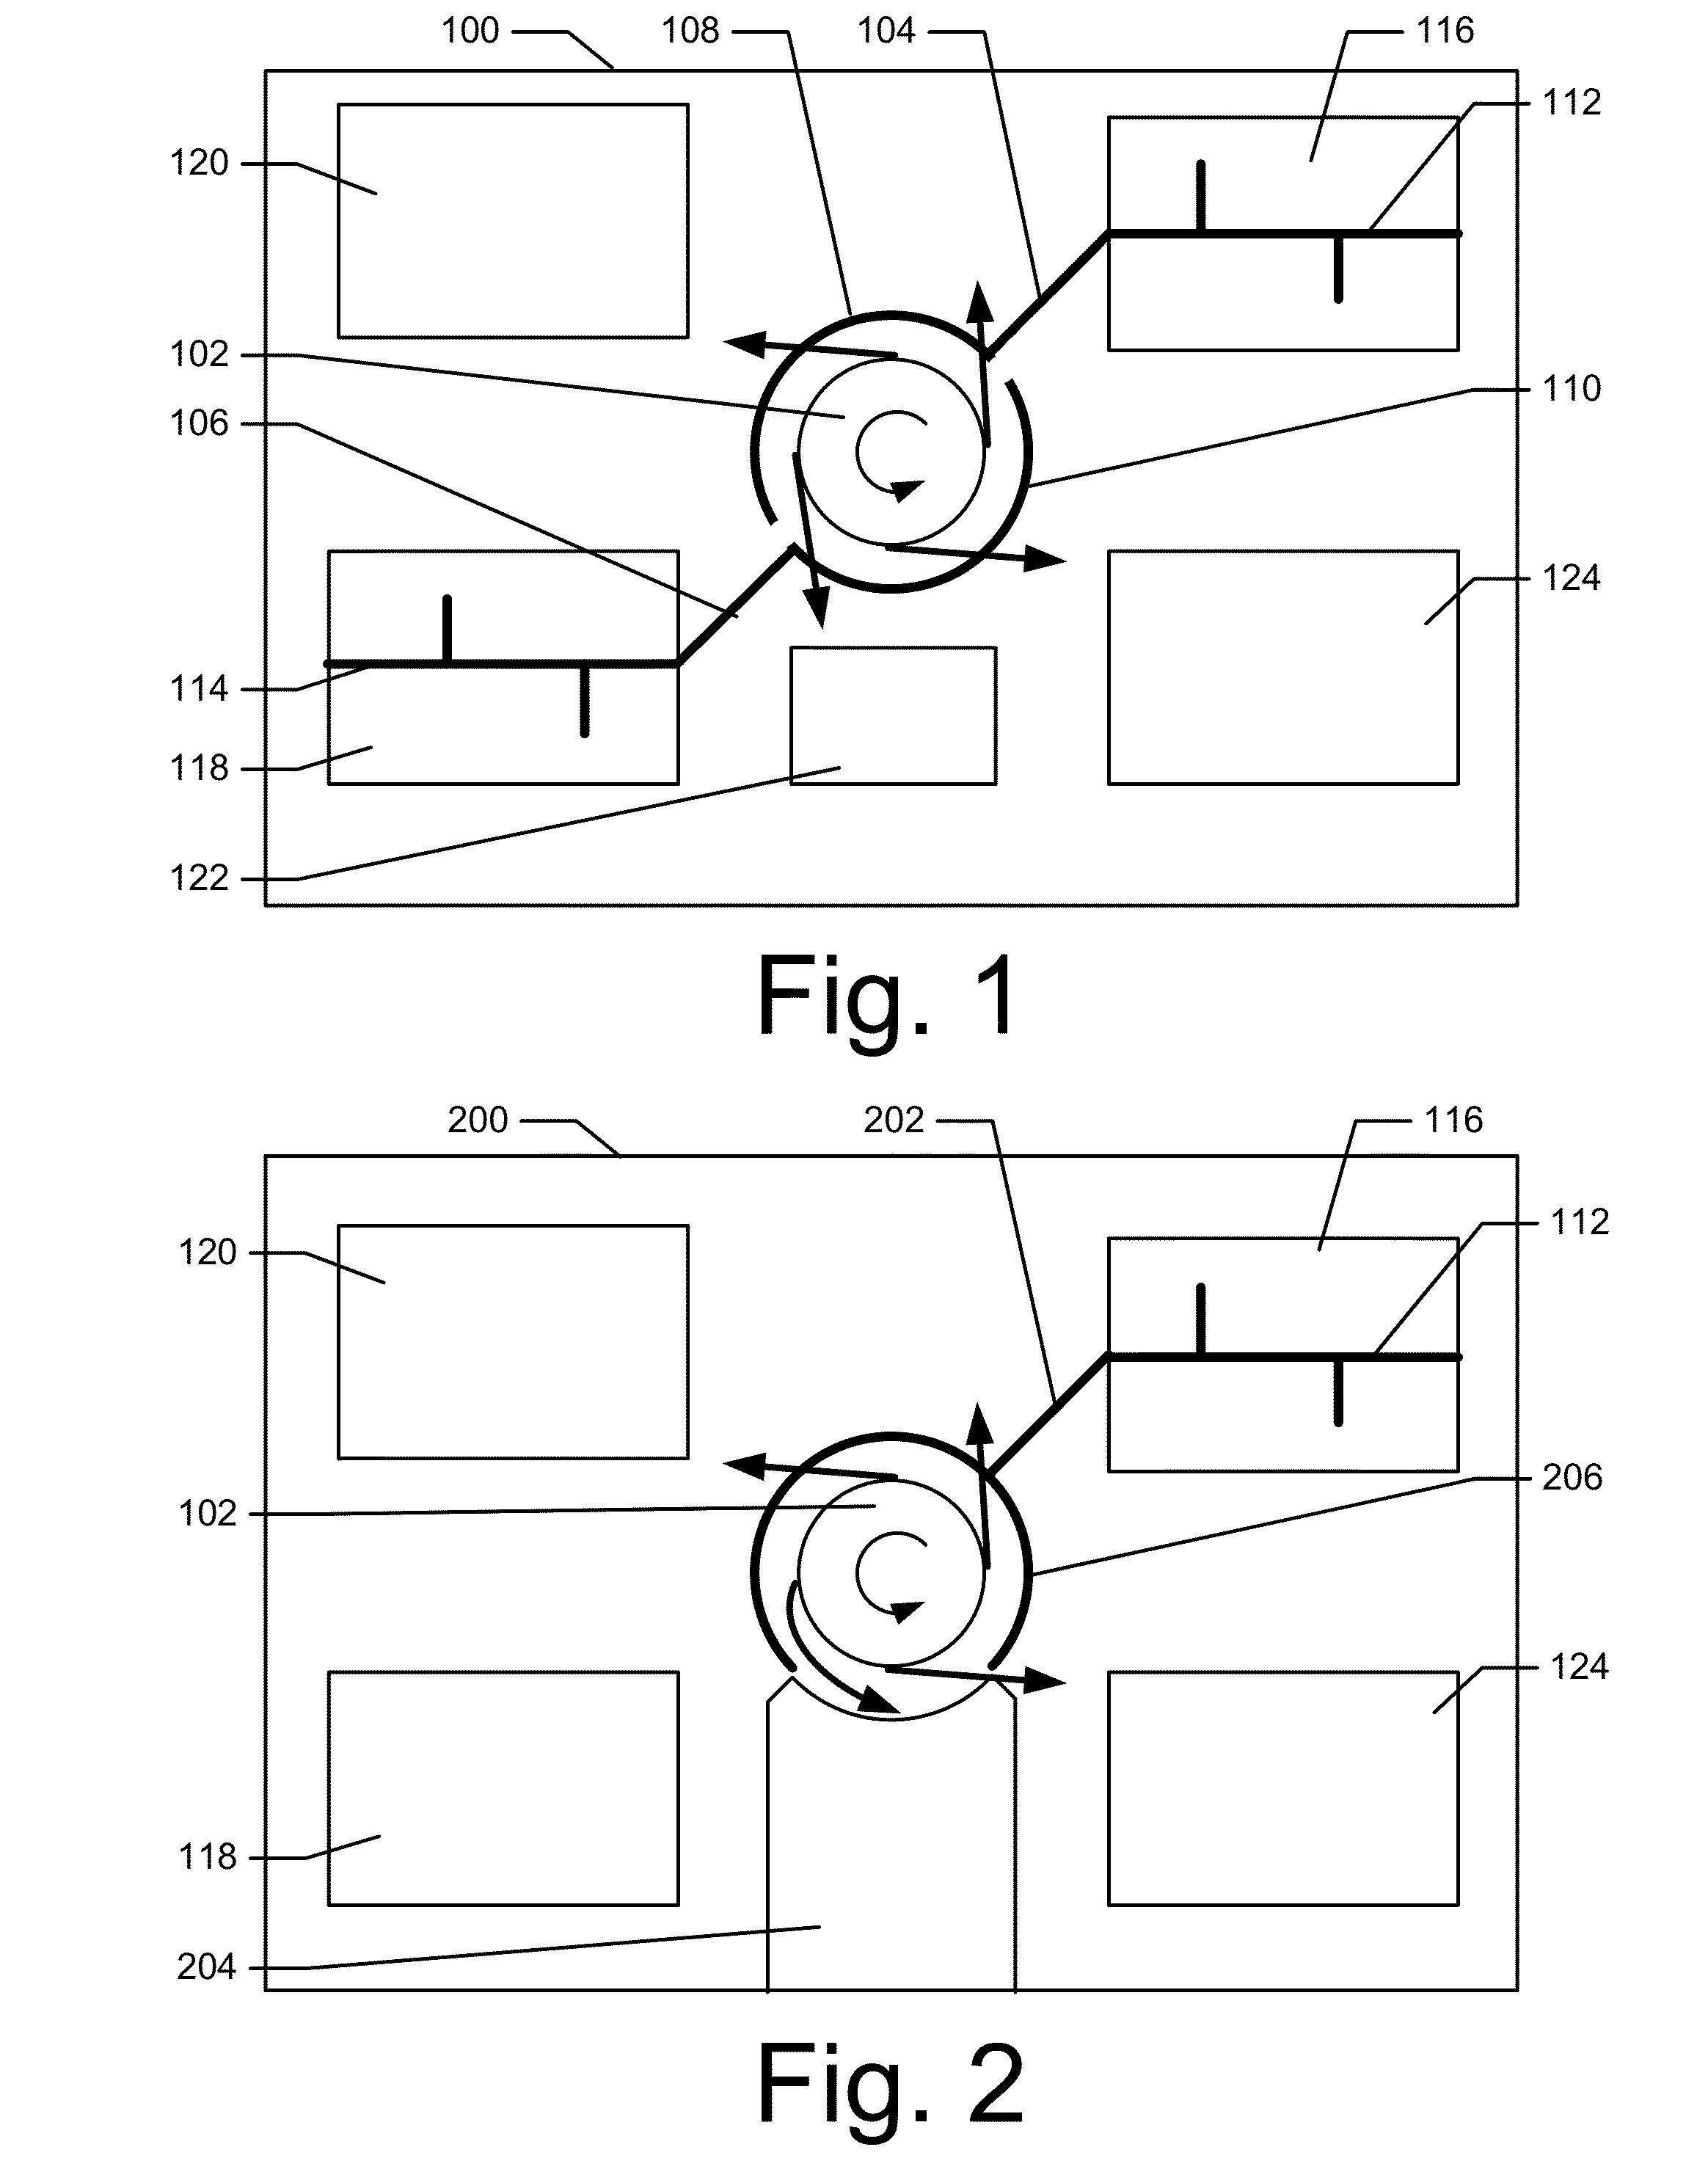 Centrifugal Fan with Integrated Thermal Transfer Unit